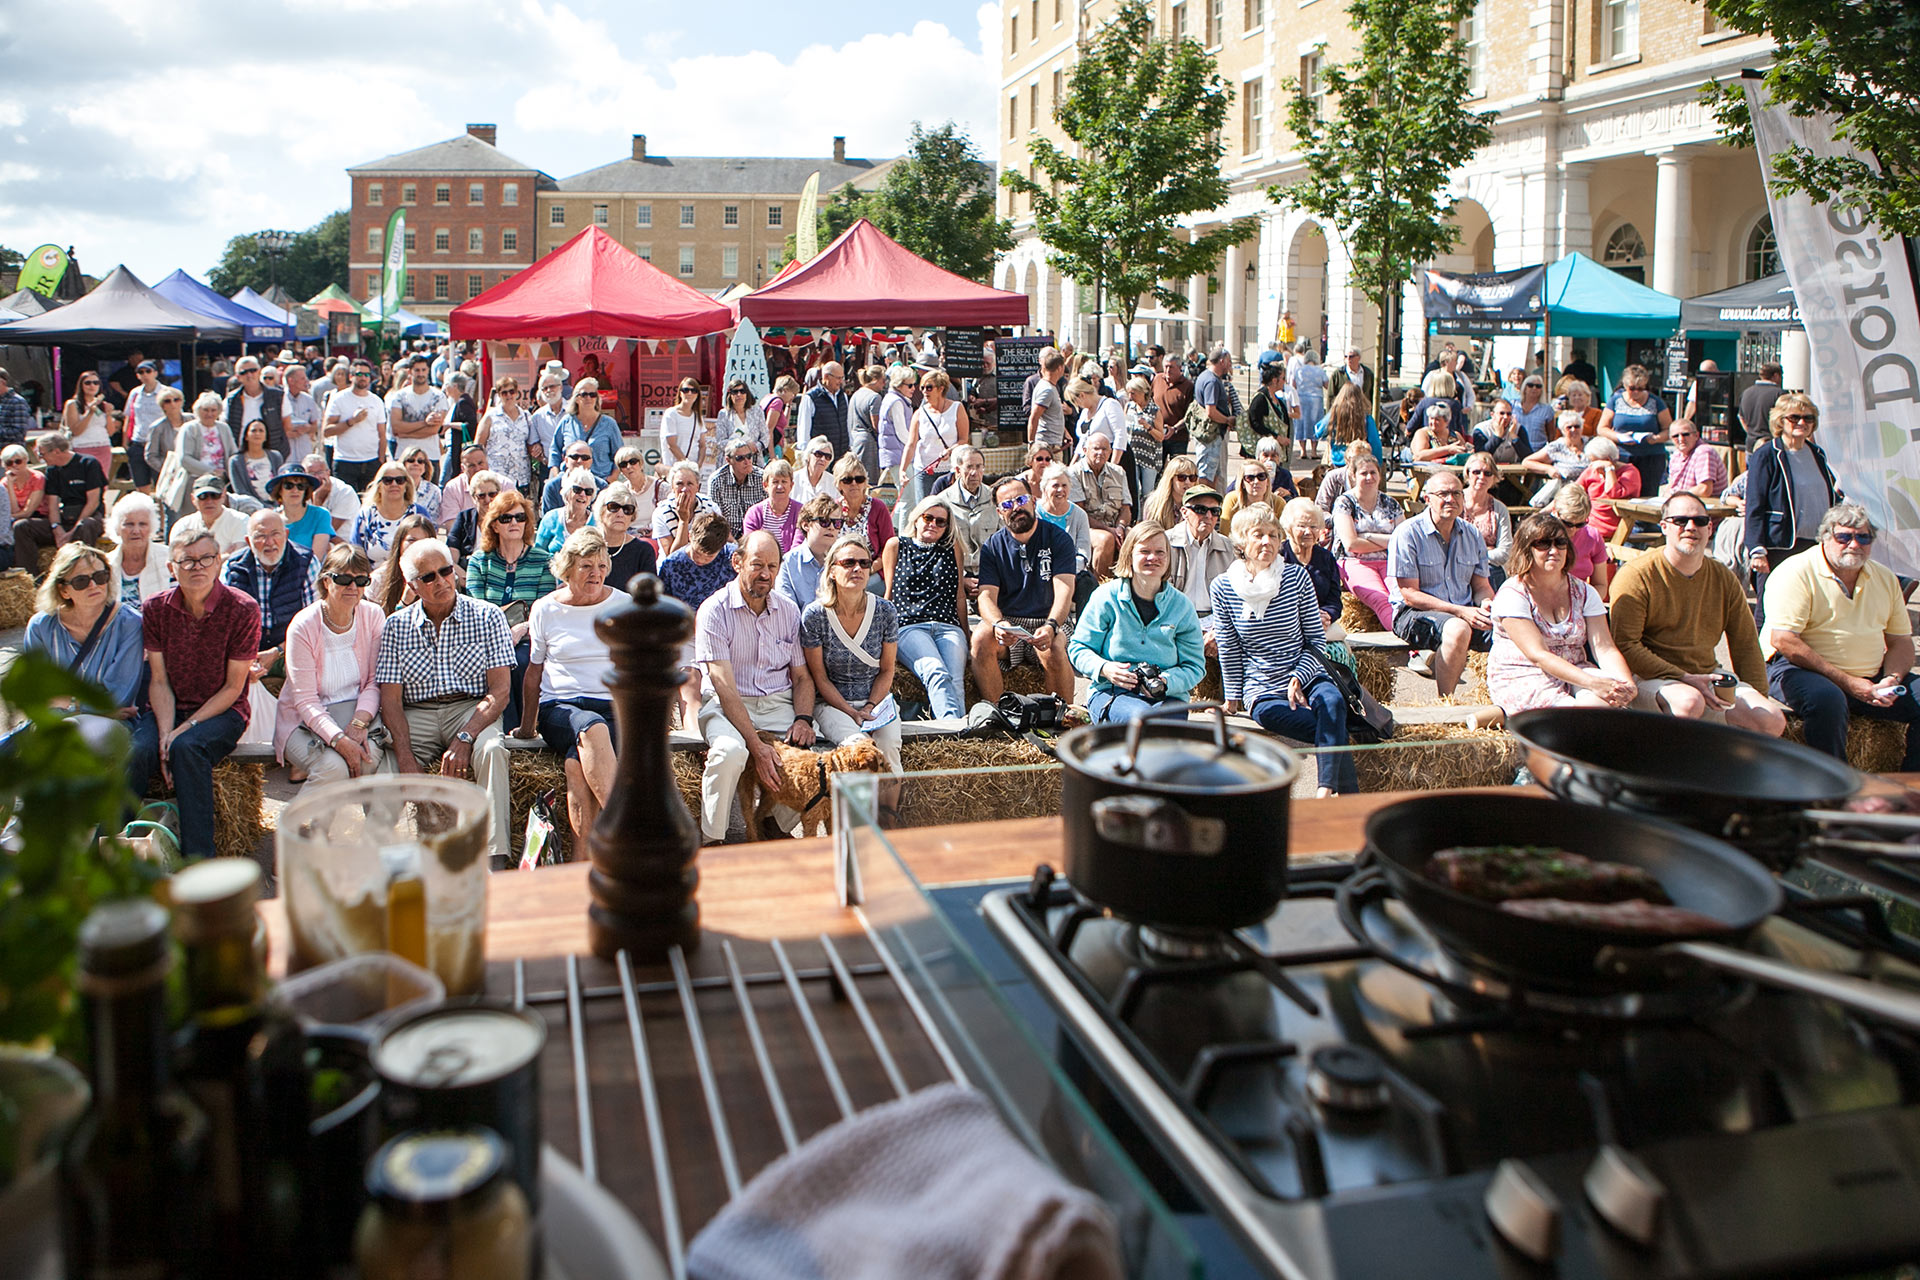 The Dorset Food Festival is an annual food festival in Queen Mother Square each August